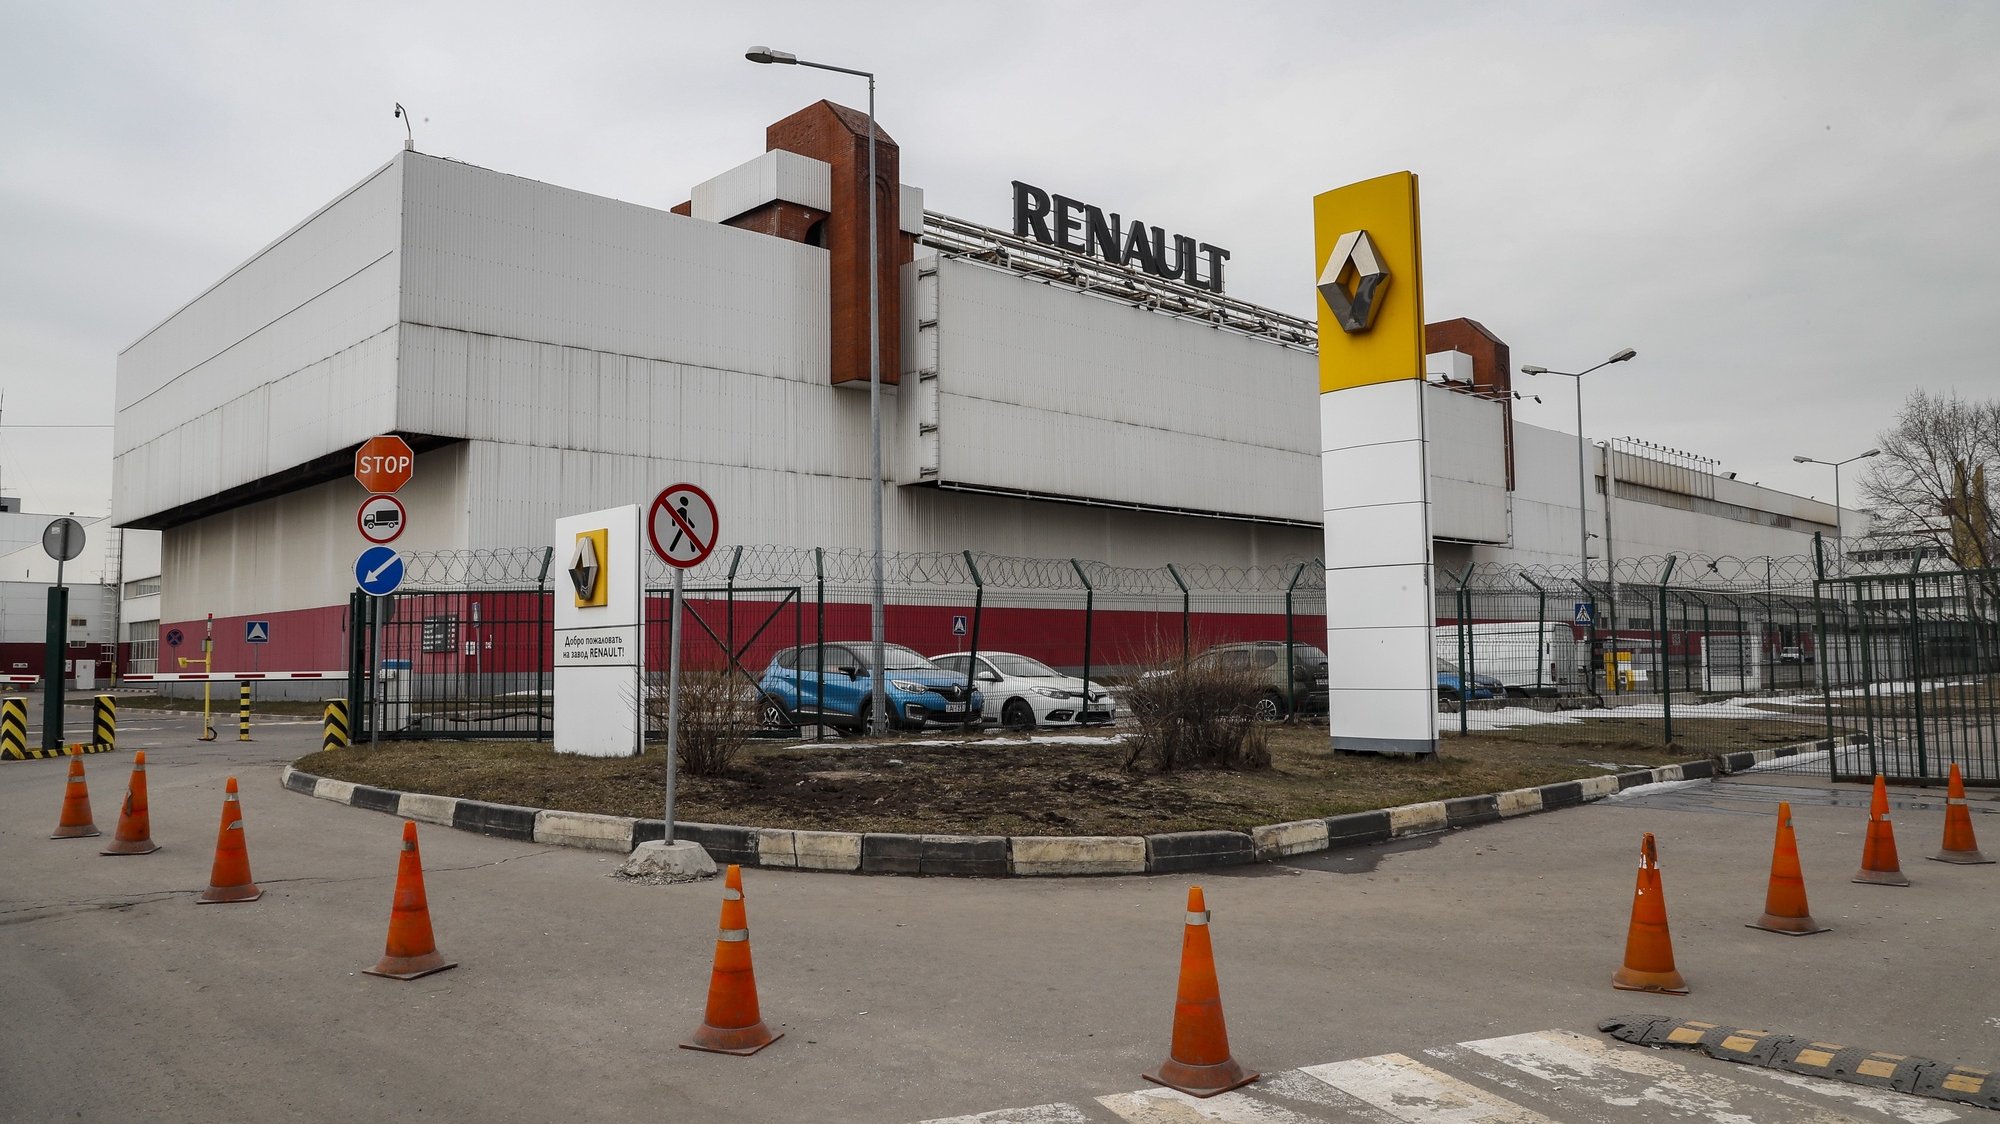 epa09848685 Exterior view of the Renault Group plant in Moscow, Russia, 25 March 2022. The Renault Group has announced that it is suspending the operation of its plant in Moscow. CJSC Renault Russia was created in 1998 as a joint venture between Renault and the Moscow government and subsequently bought out completely by the French by the end of 2012. The company produced crossovers Renault Duster, Renault Kaptur, Nissan Terrano, and coupe-crossover Renault Arkana.  EPA/YURI KOCHETKOV